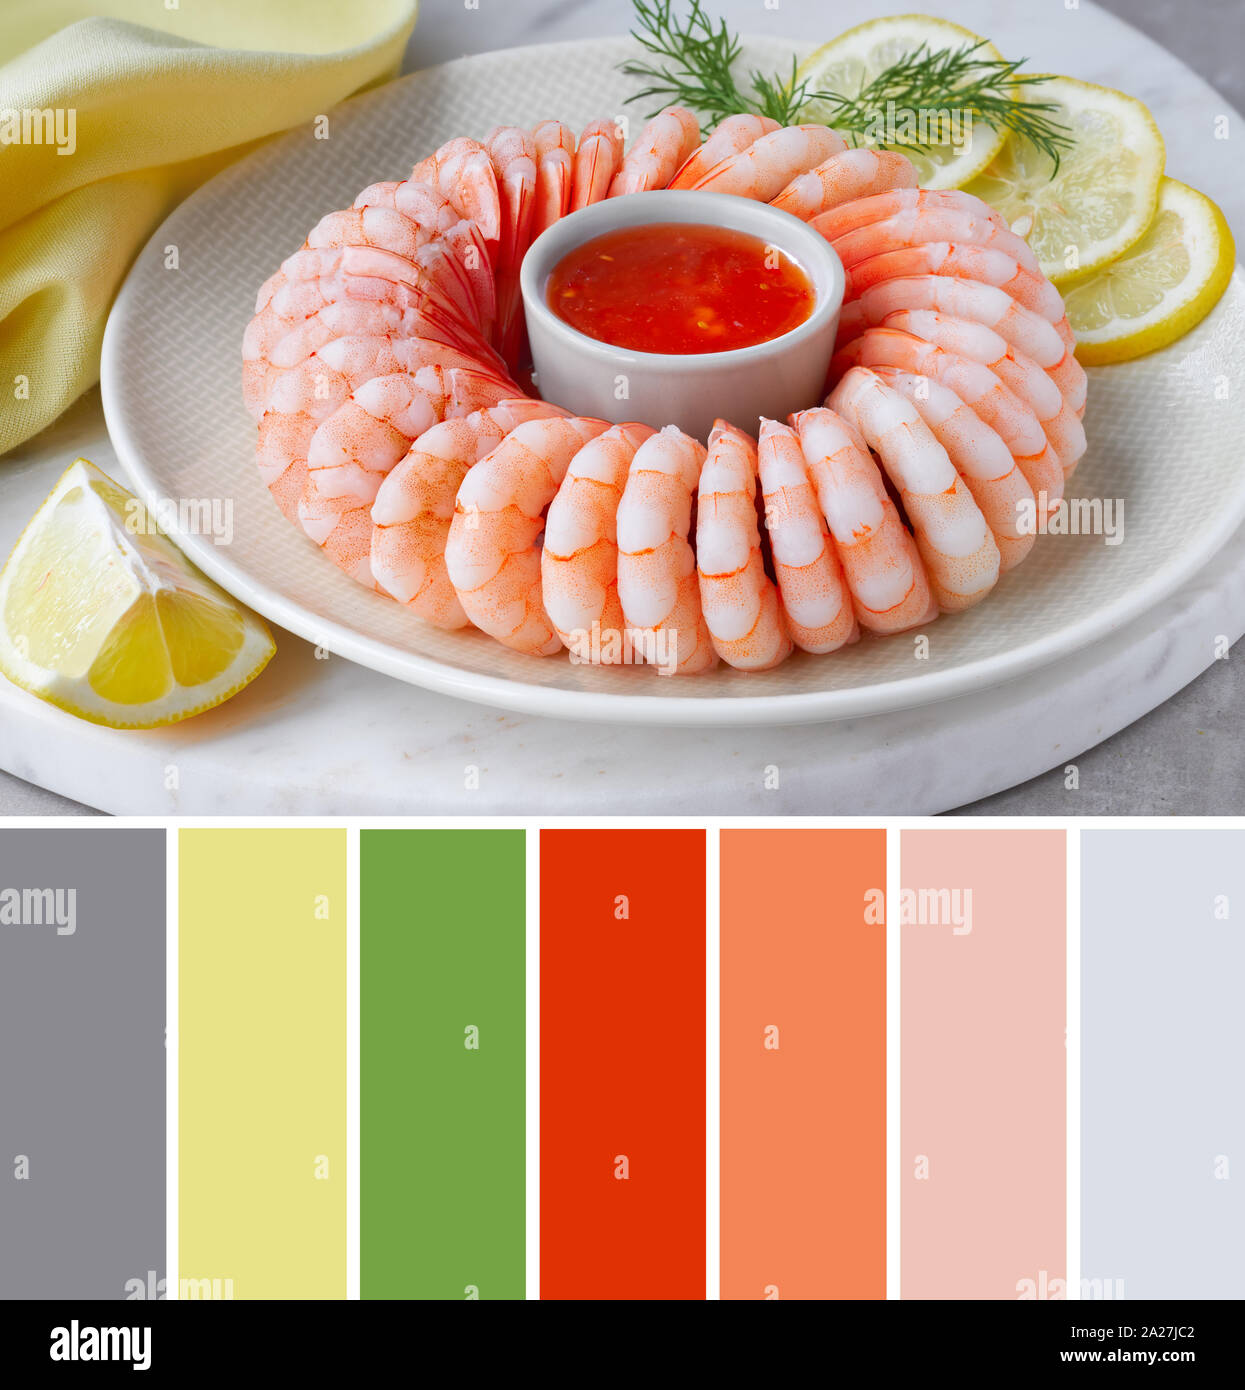 Color matching palette from image of shrimp ring with sweet chili sauce on marble serving board with yellow towel Stock Photo